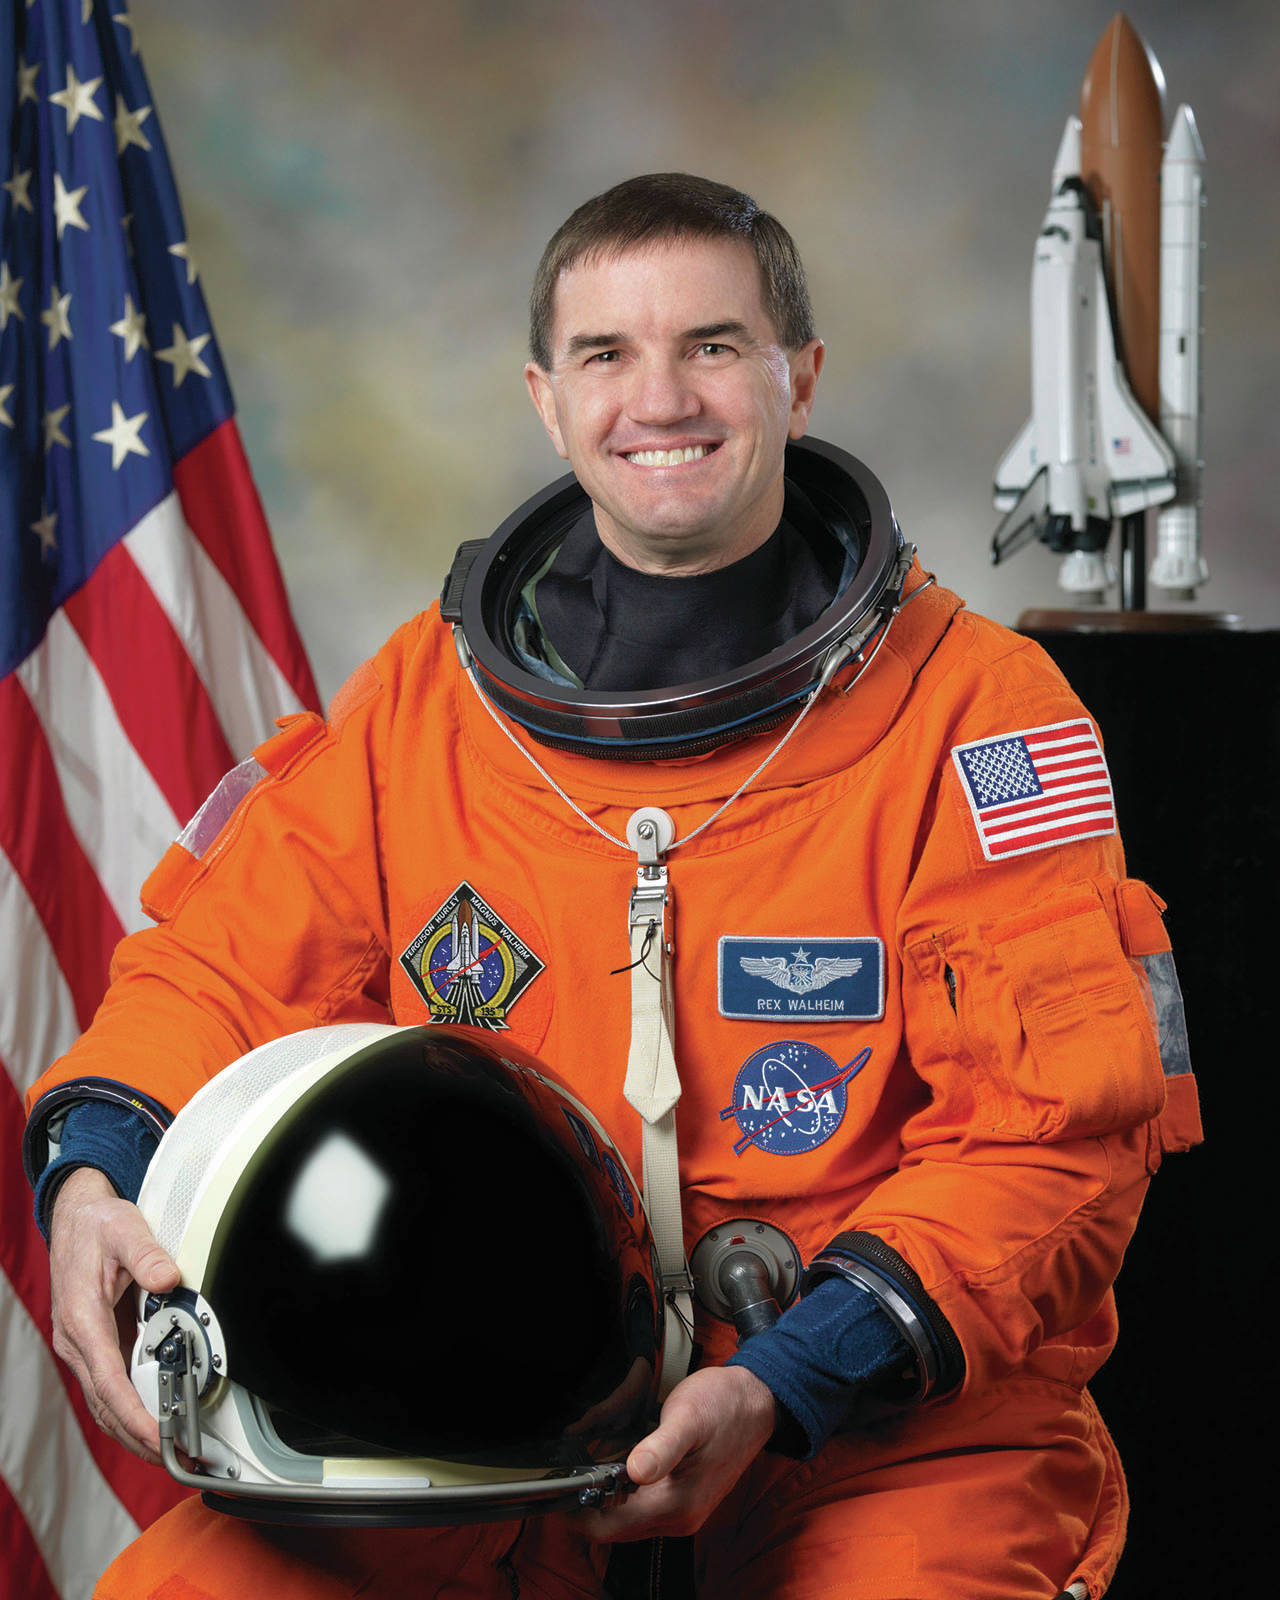 Astronaut Rex Walheim poses for his official Space Shuttle Atlantis STS-135 portrait on Feb. 11, 2011. (Photo by Bill Stafford/NASA)